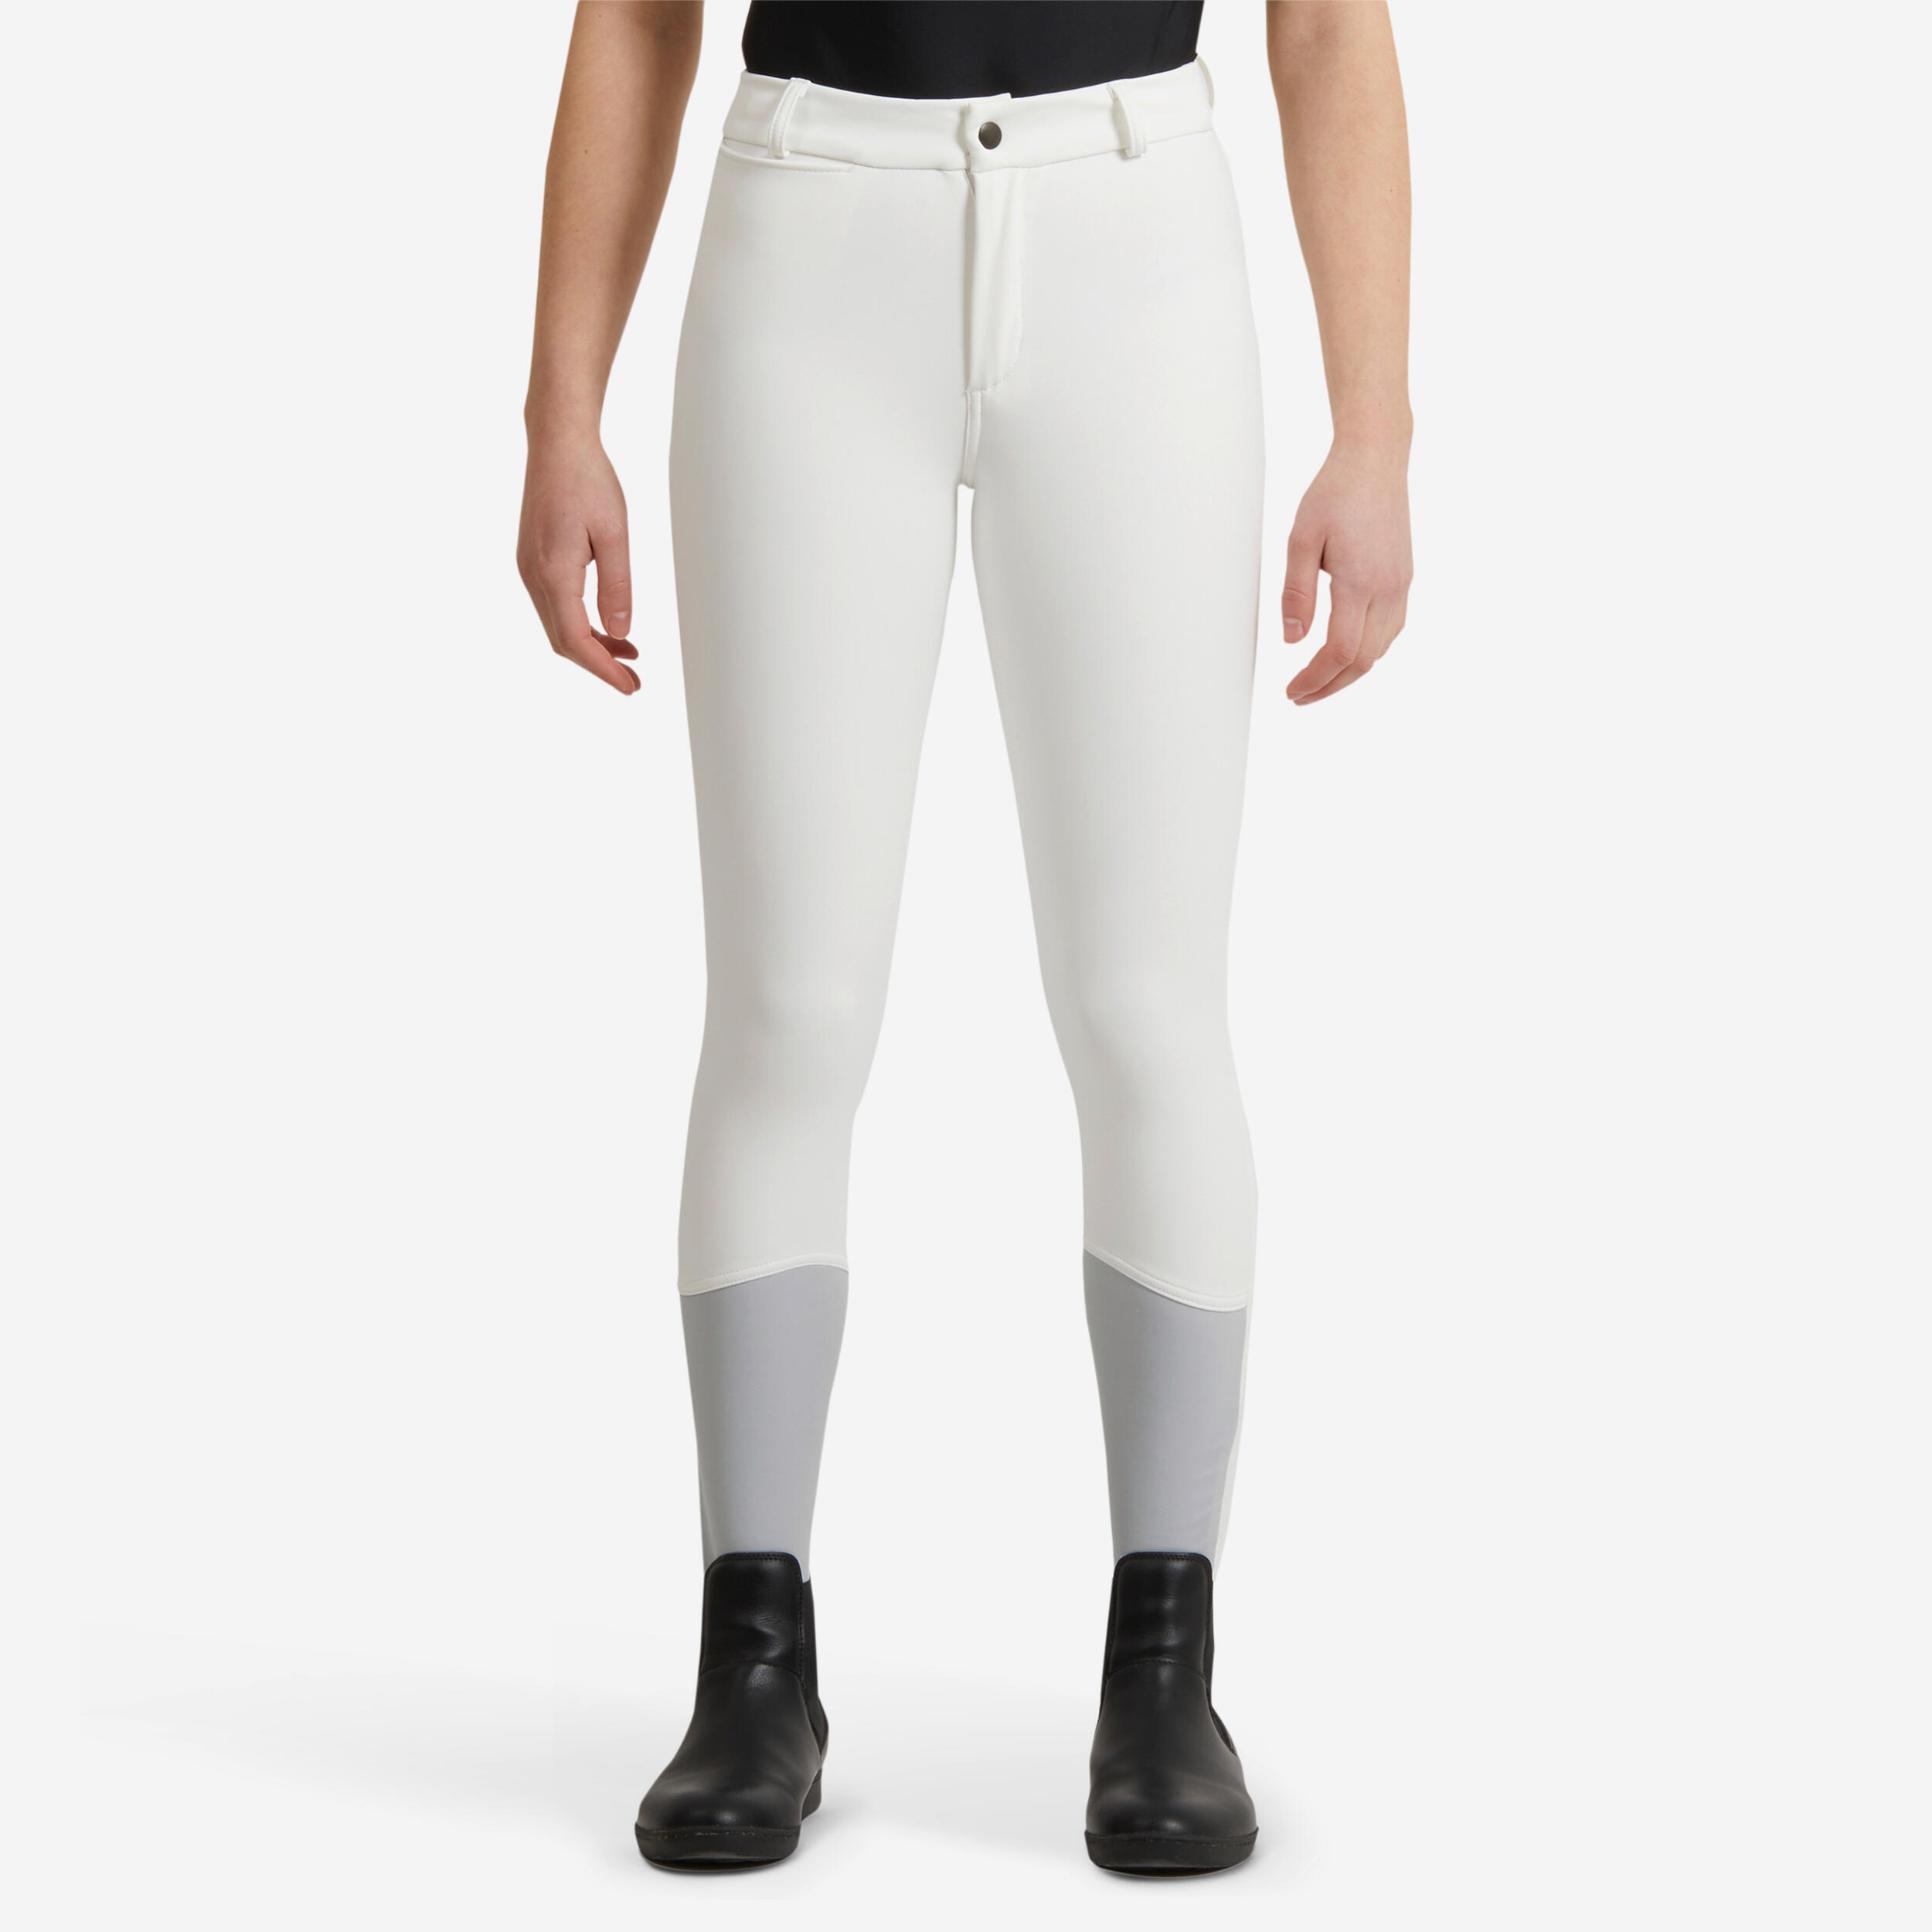 Kids' Horse Riding Warm and Water Repellent Competition Jodhpurs 500 Kipwarm - White 3/9